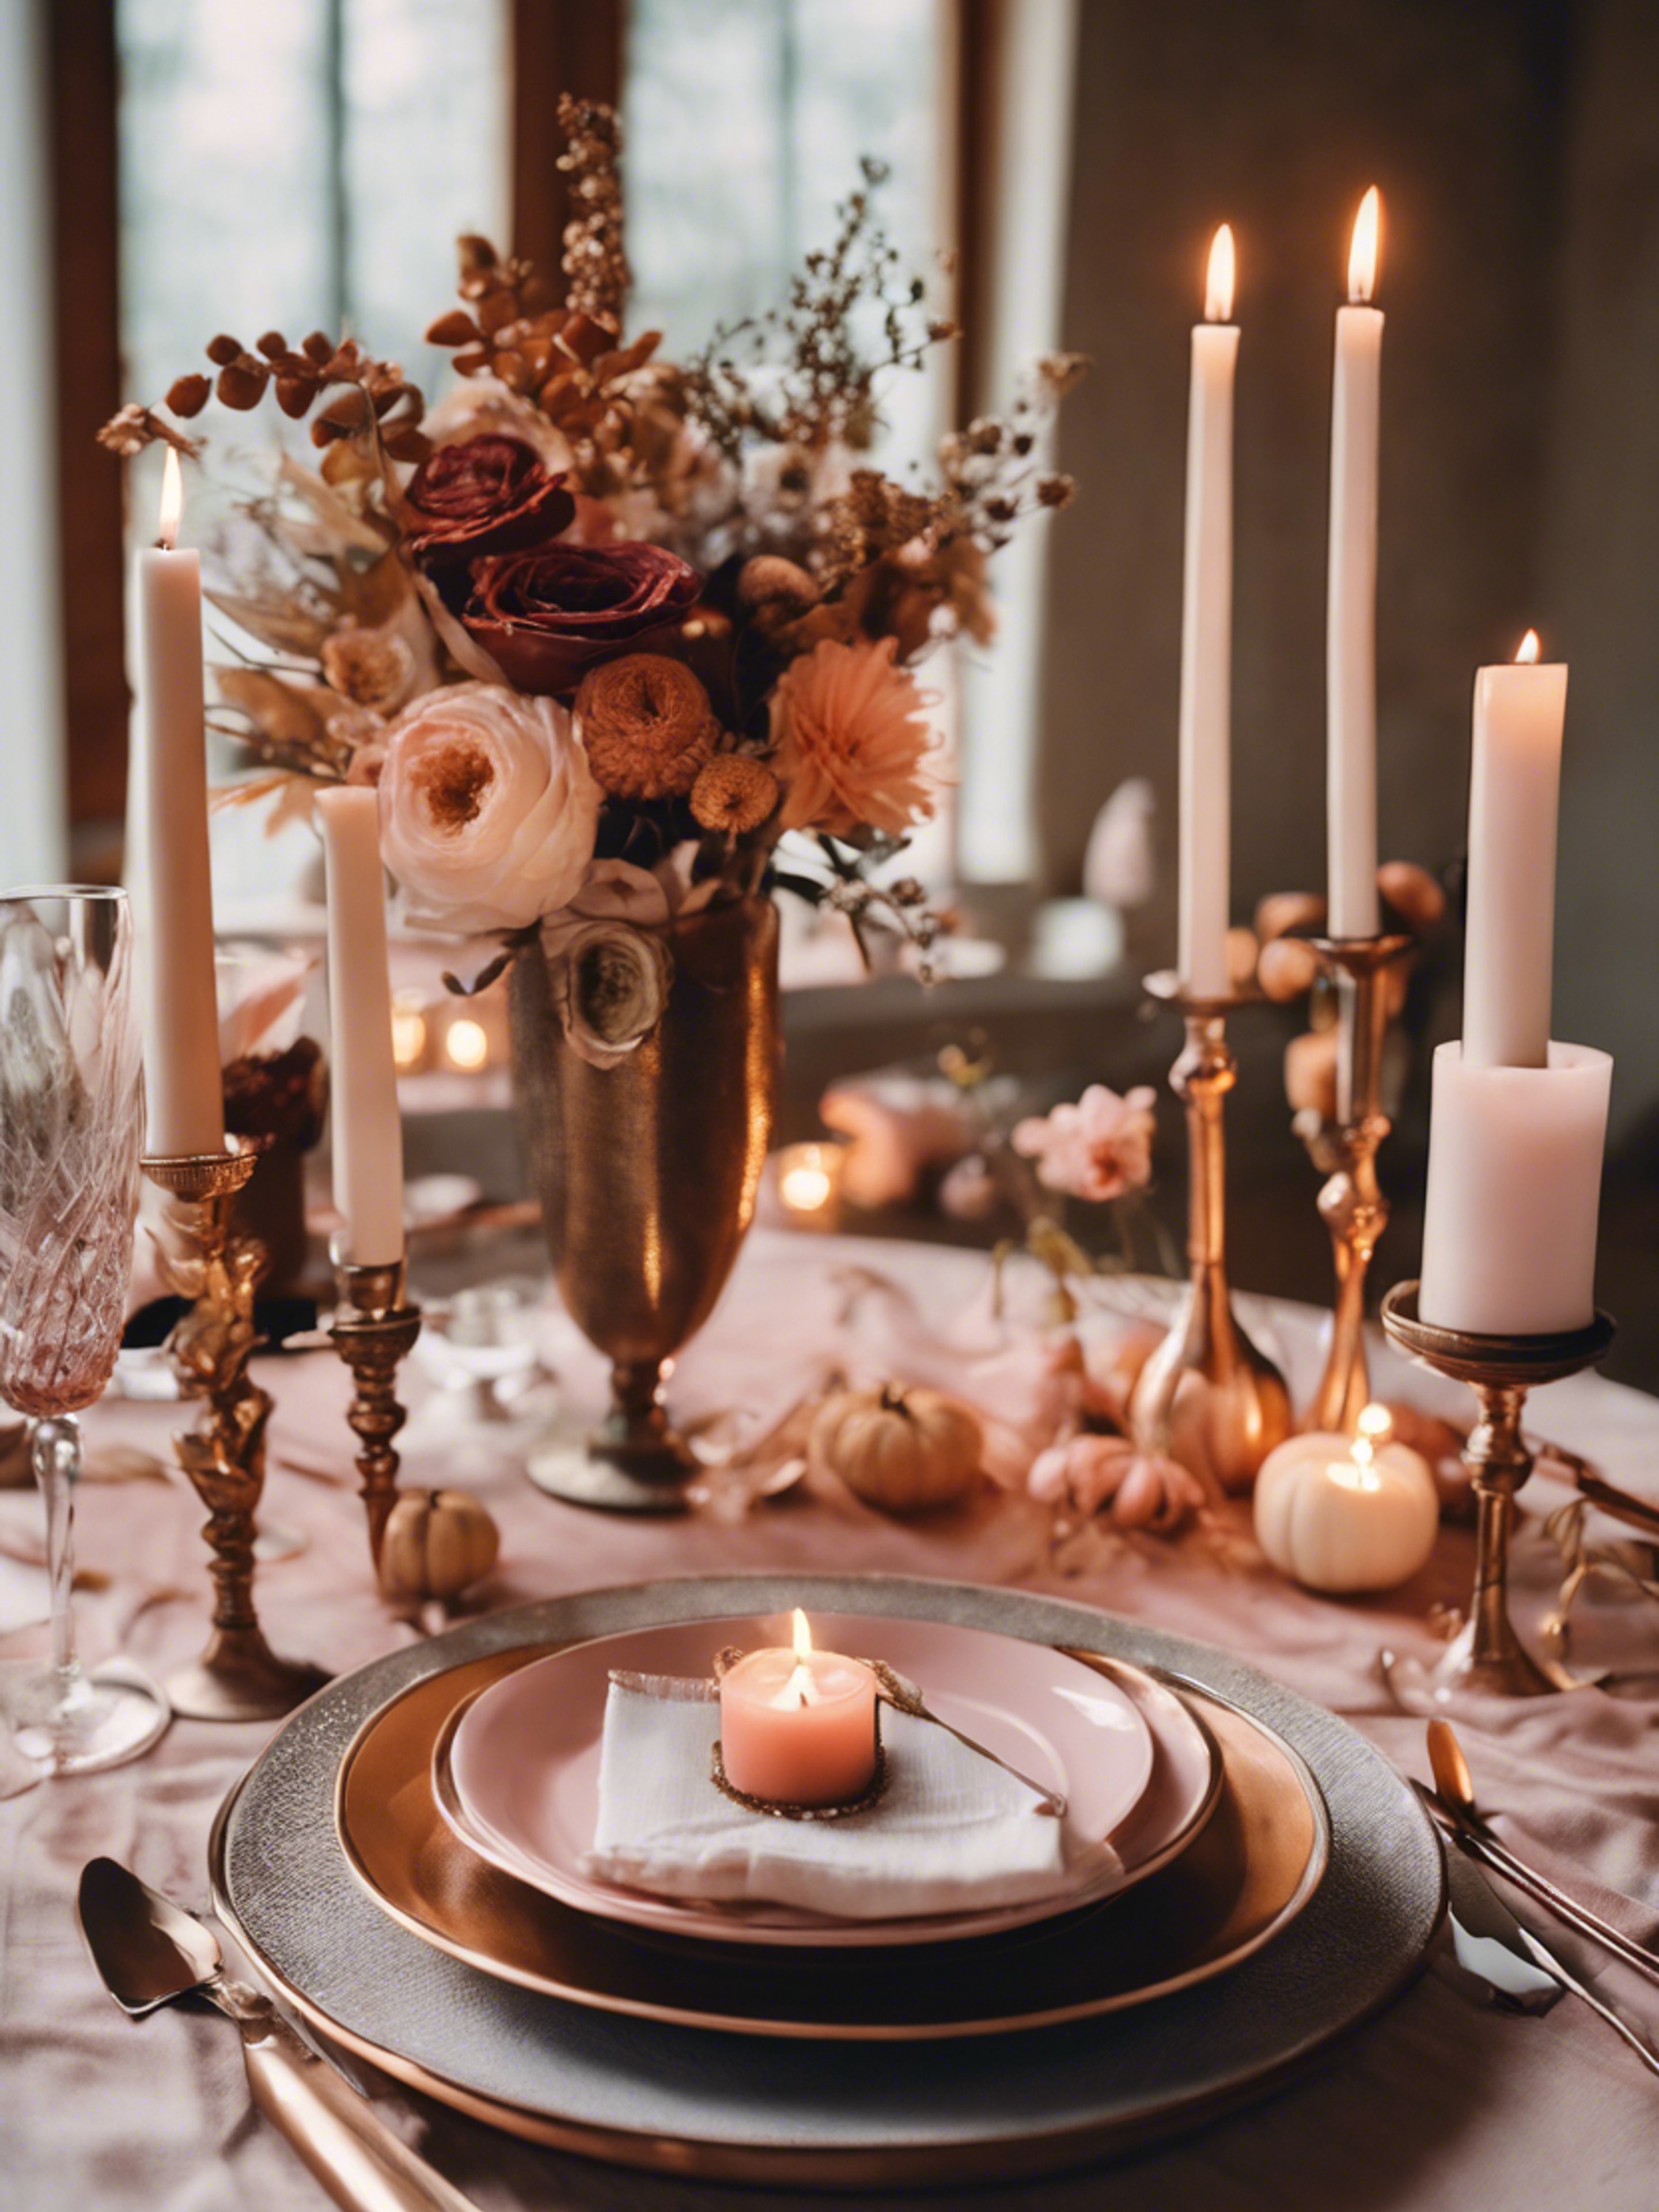 A romantic Thanksgiving tablescape for two, adorned with blush-colored candles, copper utensils, and a gorgeous floral centerpiece. Обои[bc0a53f0db0f4071a53b]